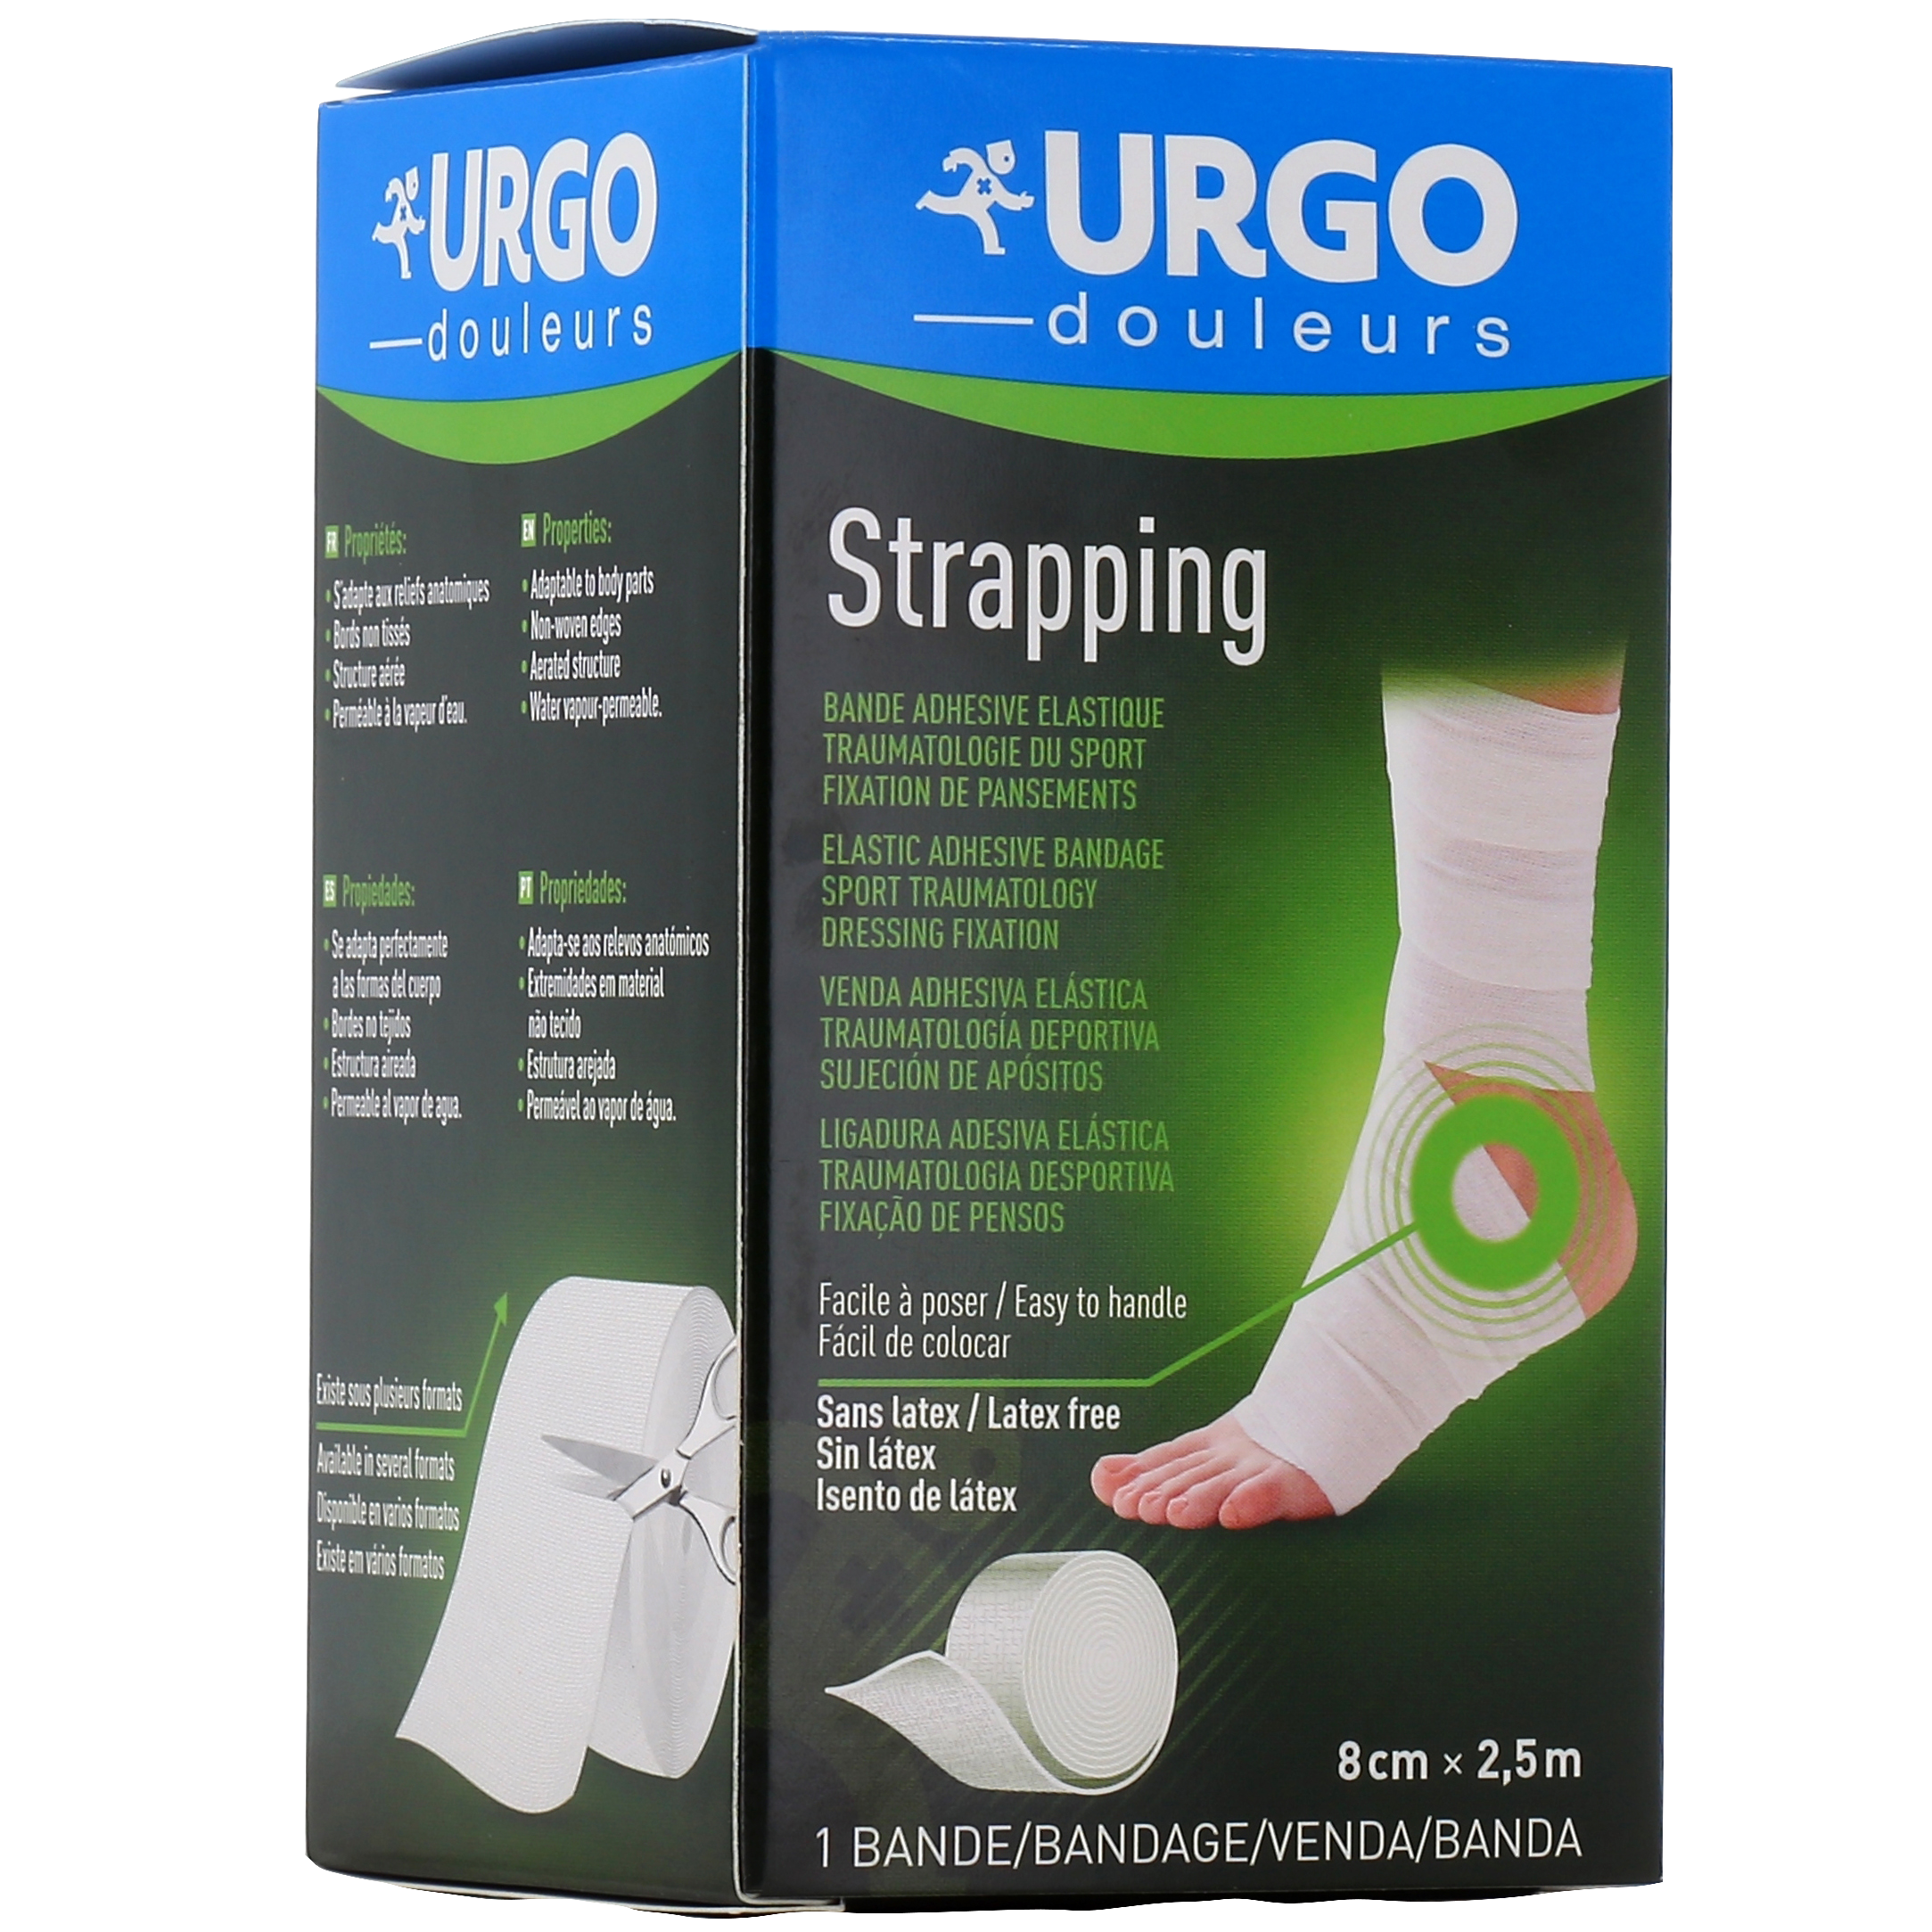 Bande strapping Urgostrapping au meilleur prix !